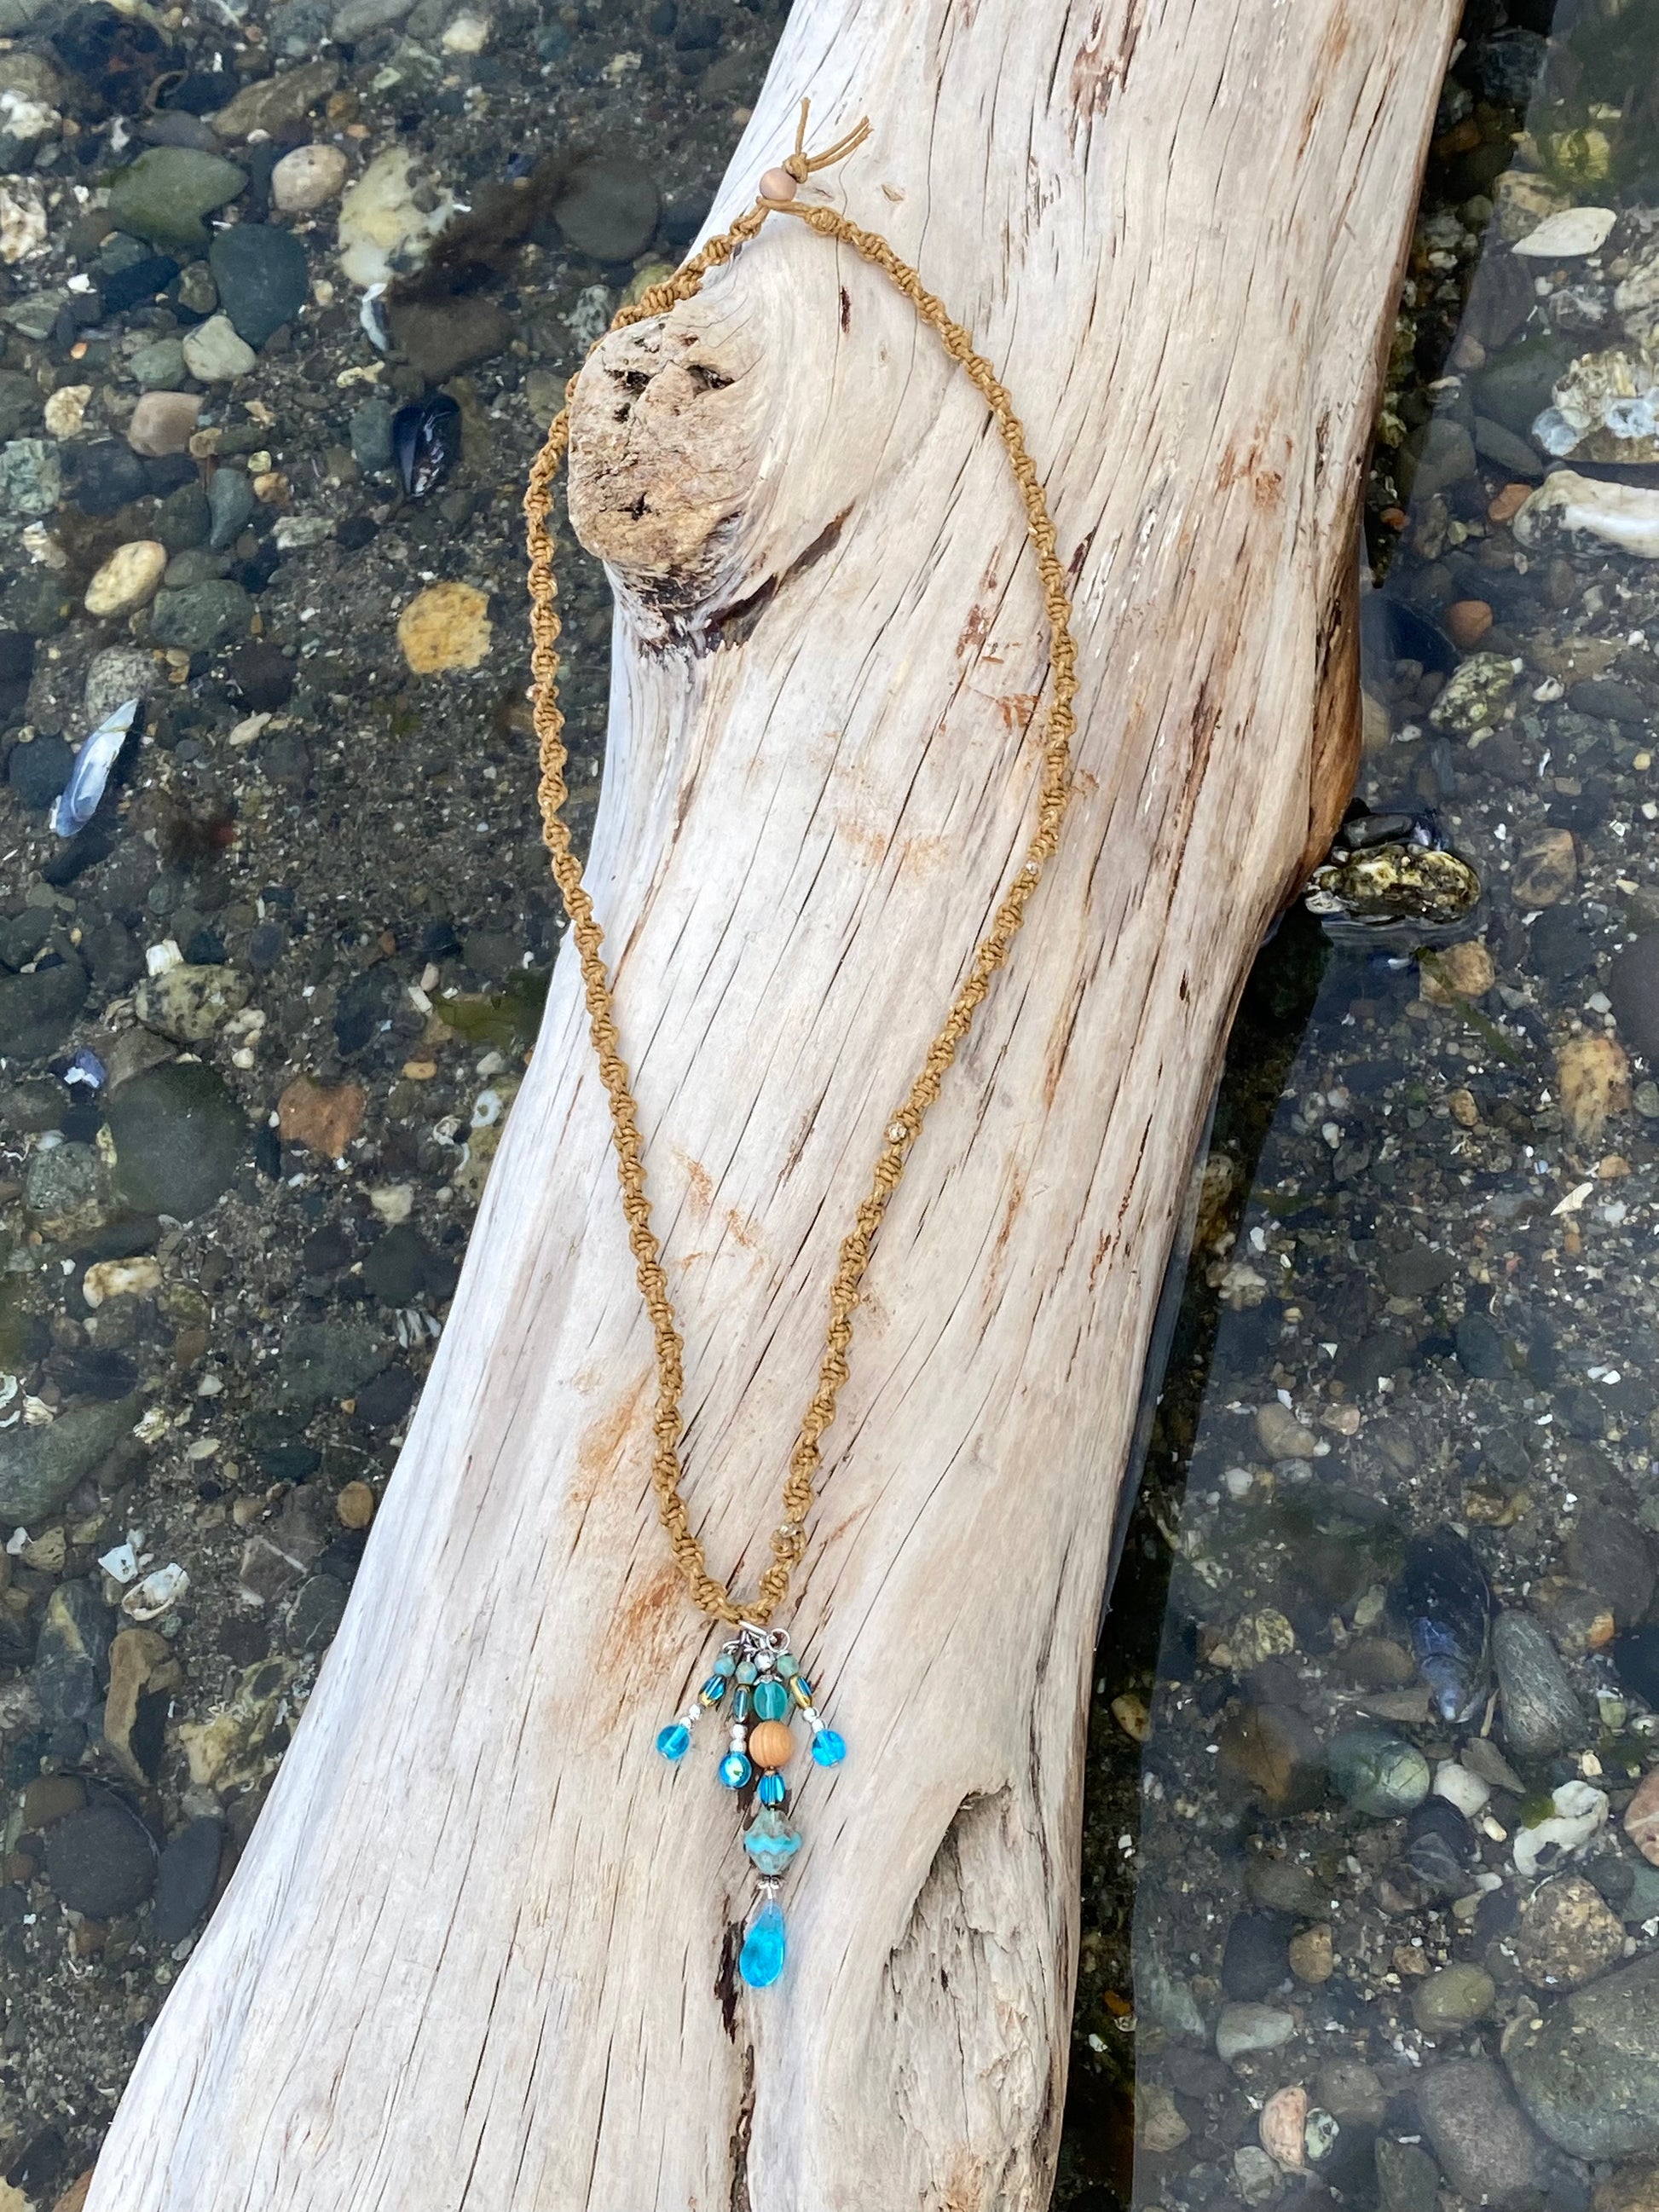 Boho Braided necklace, with Blue Dangle,  ocean beads, on  a piece of driftwood